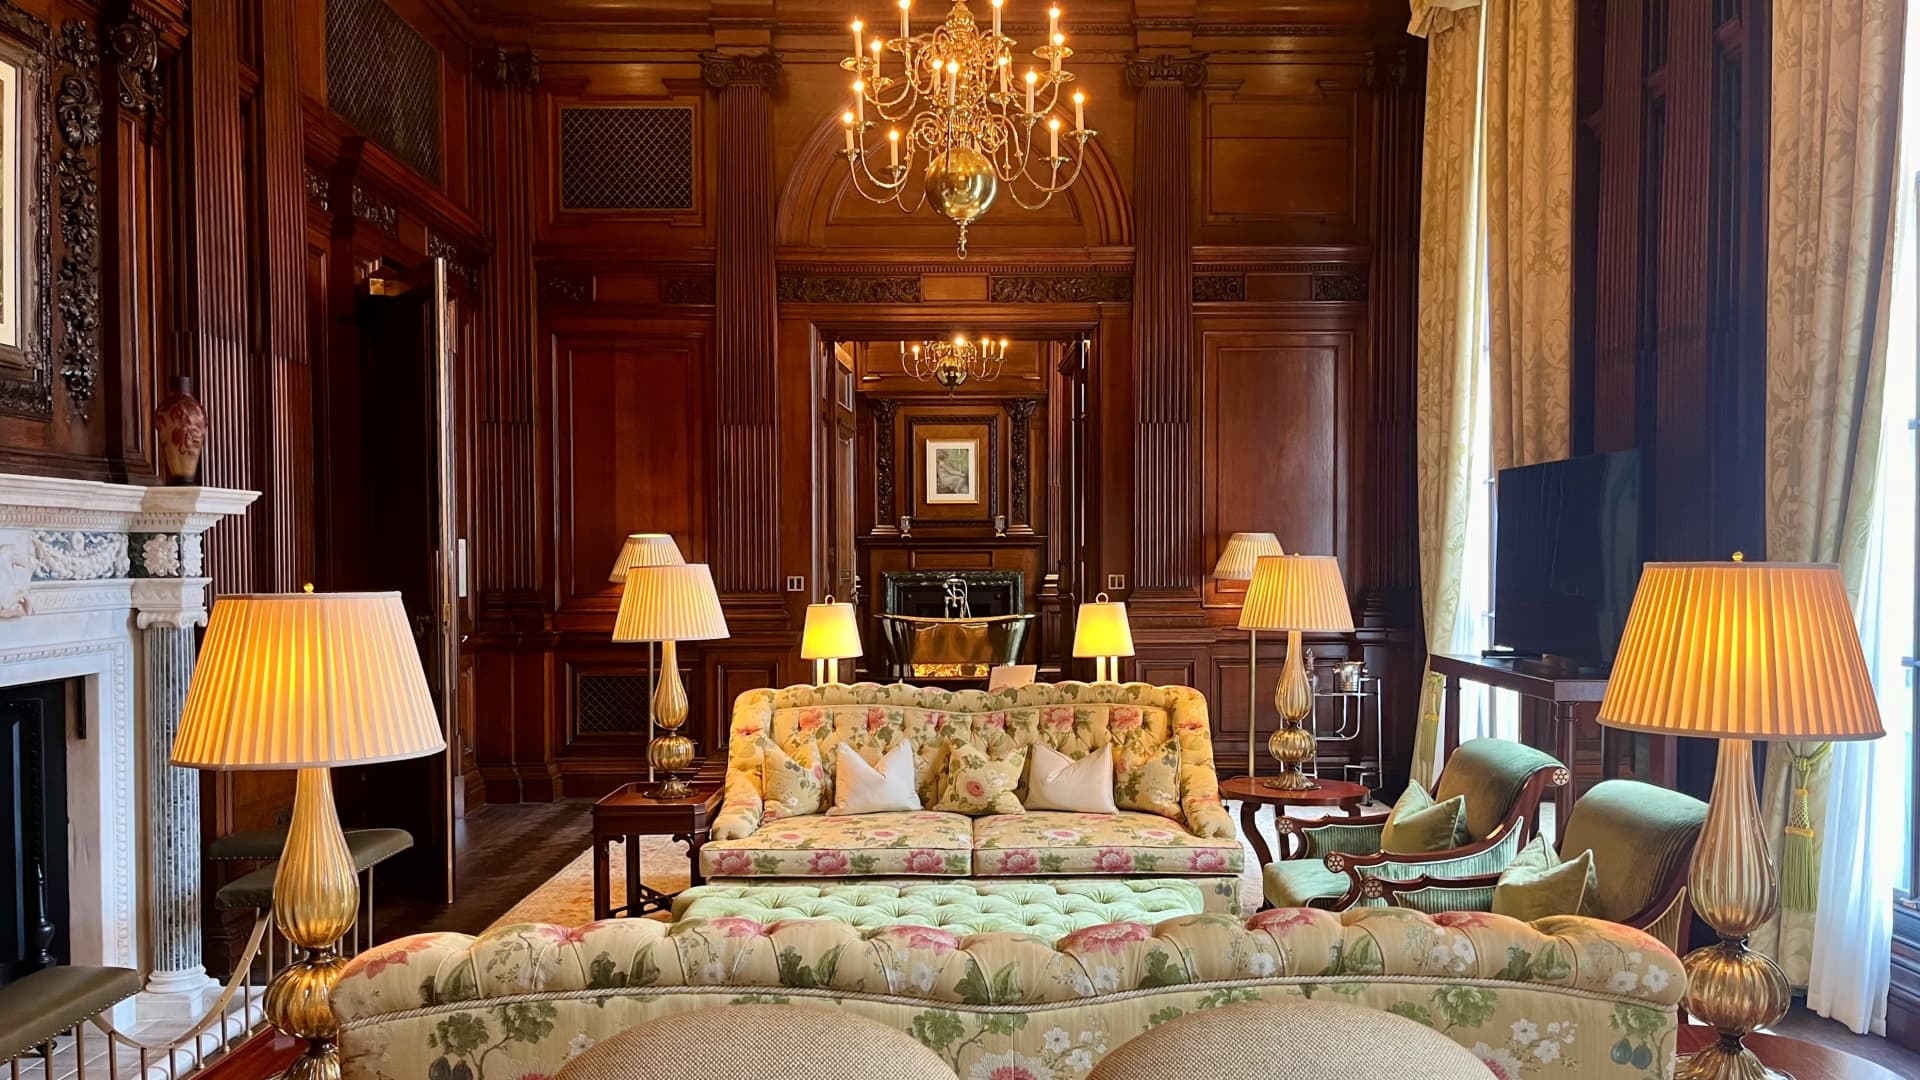 The Granville Suite is one of five heritage suites at Raffles London, each occupying rooms which previously served as offices for some of Britain's leading politicians and military leaders.